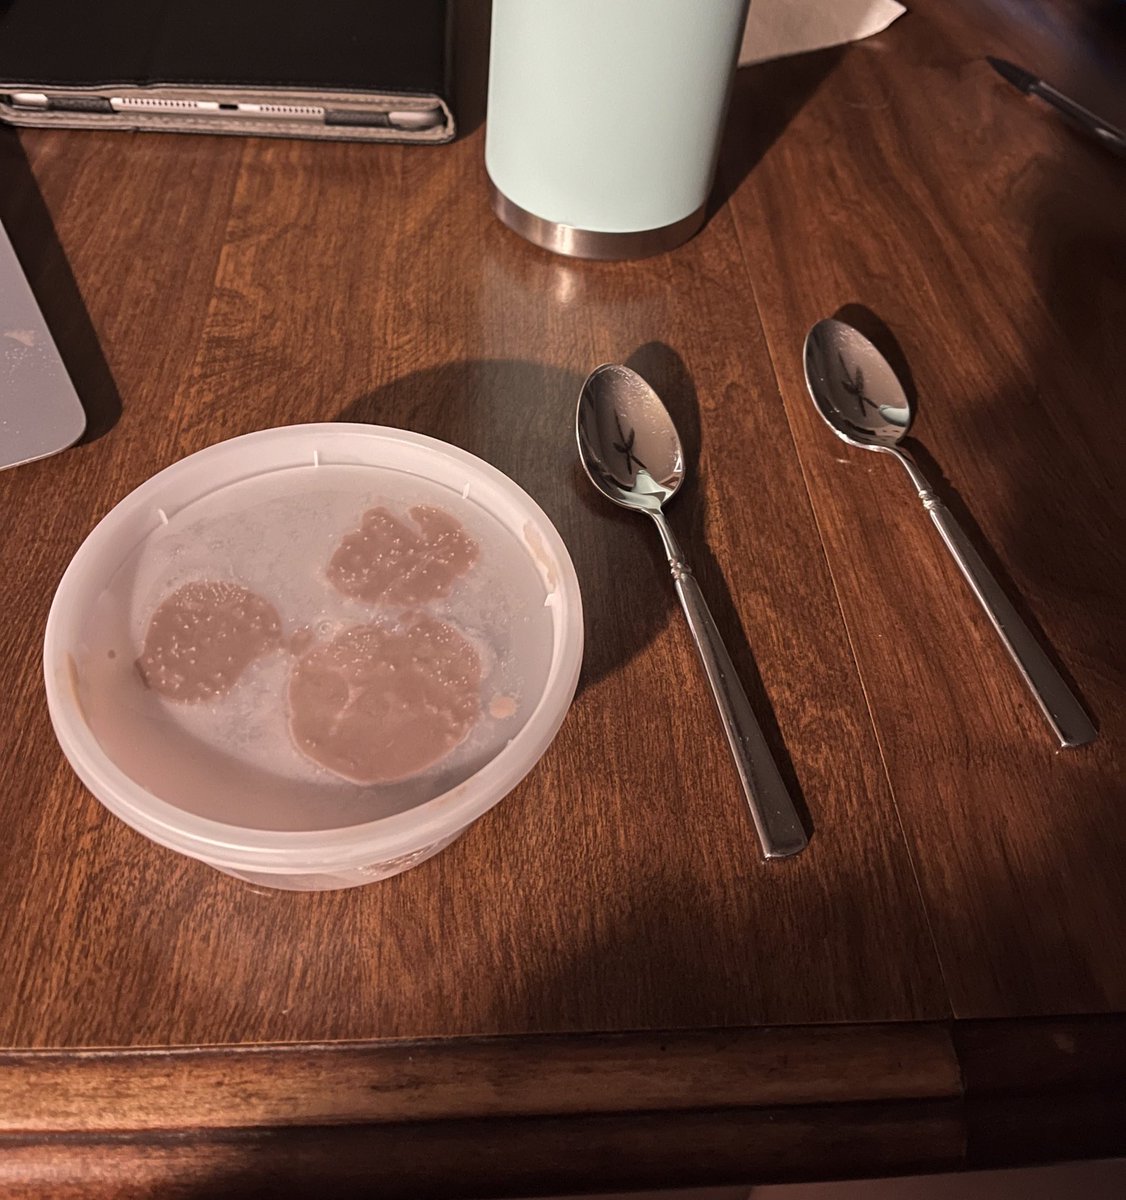 I’m so exhausted that I somehow got two spoons for my ice cream Even the ice cream was shocked